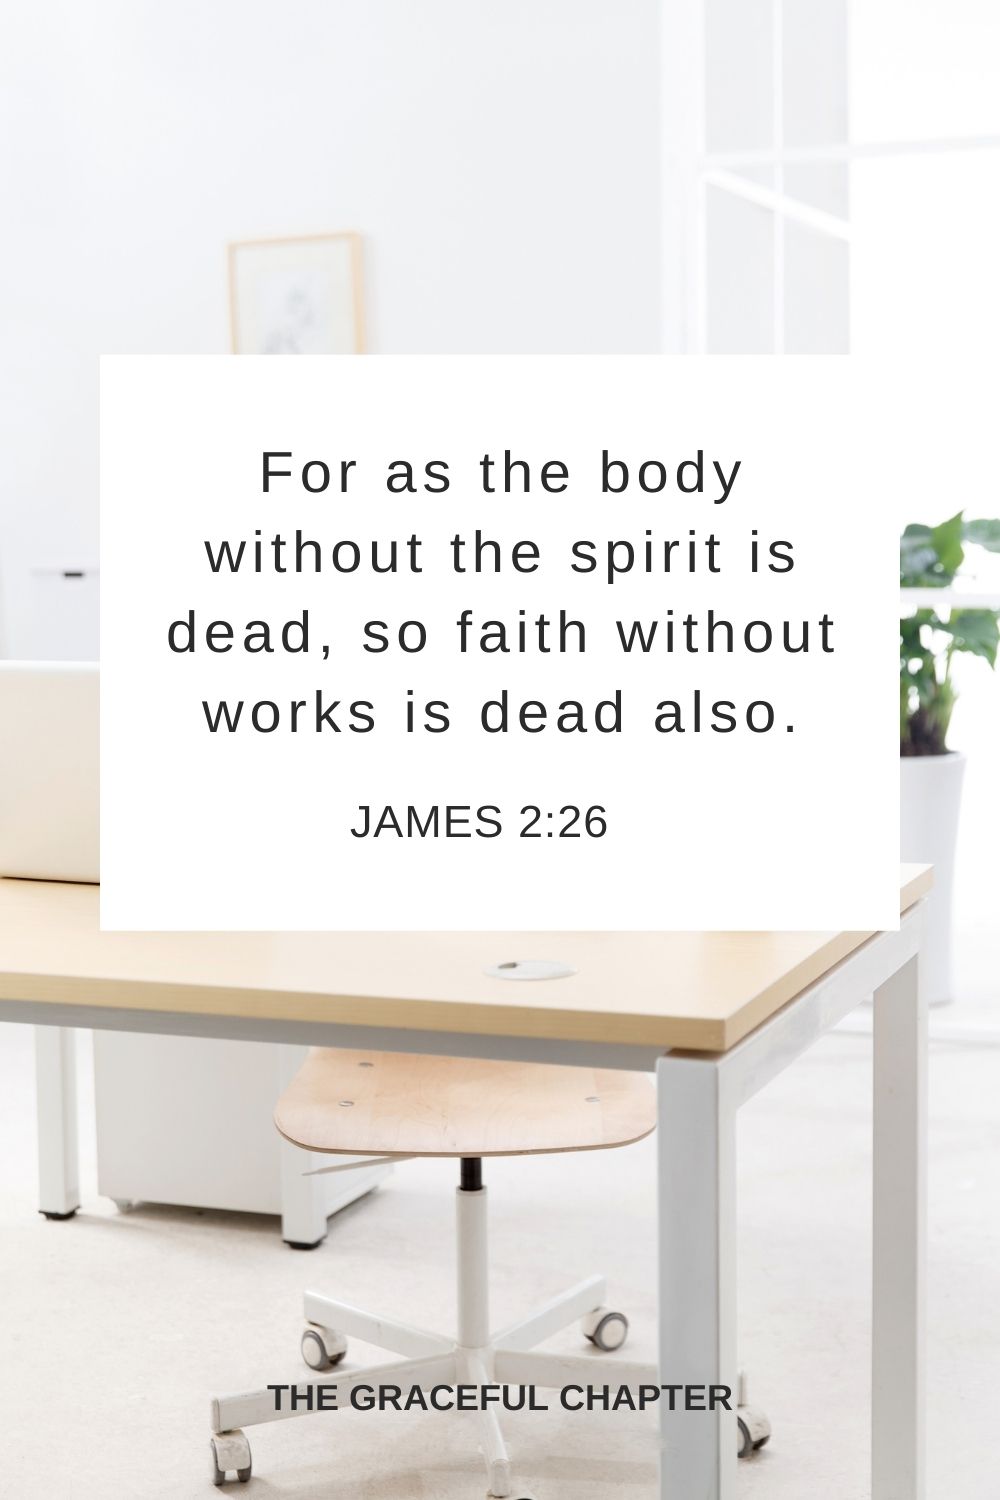 For as the body without the spirit is dead, so faith without works is dead also. James 2:26